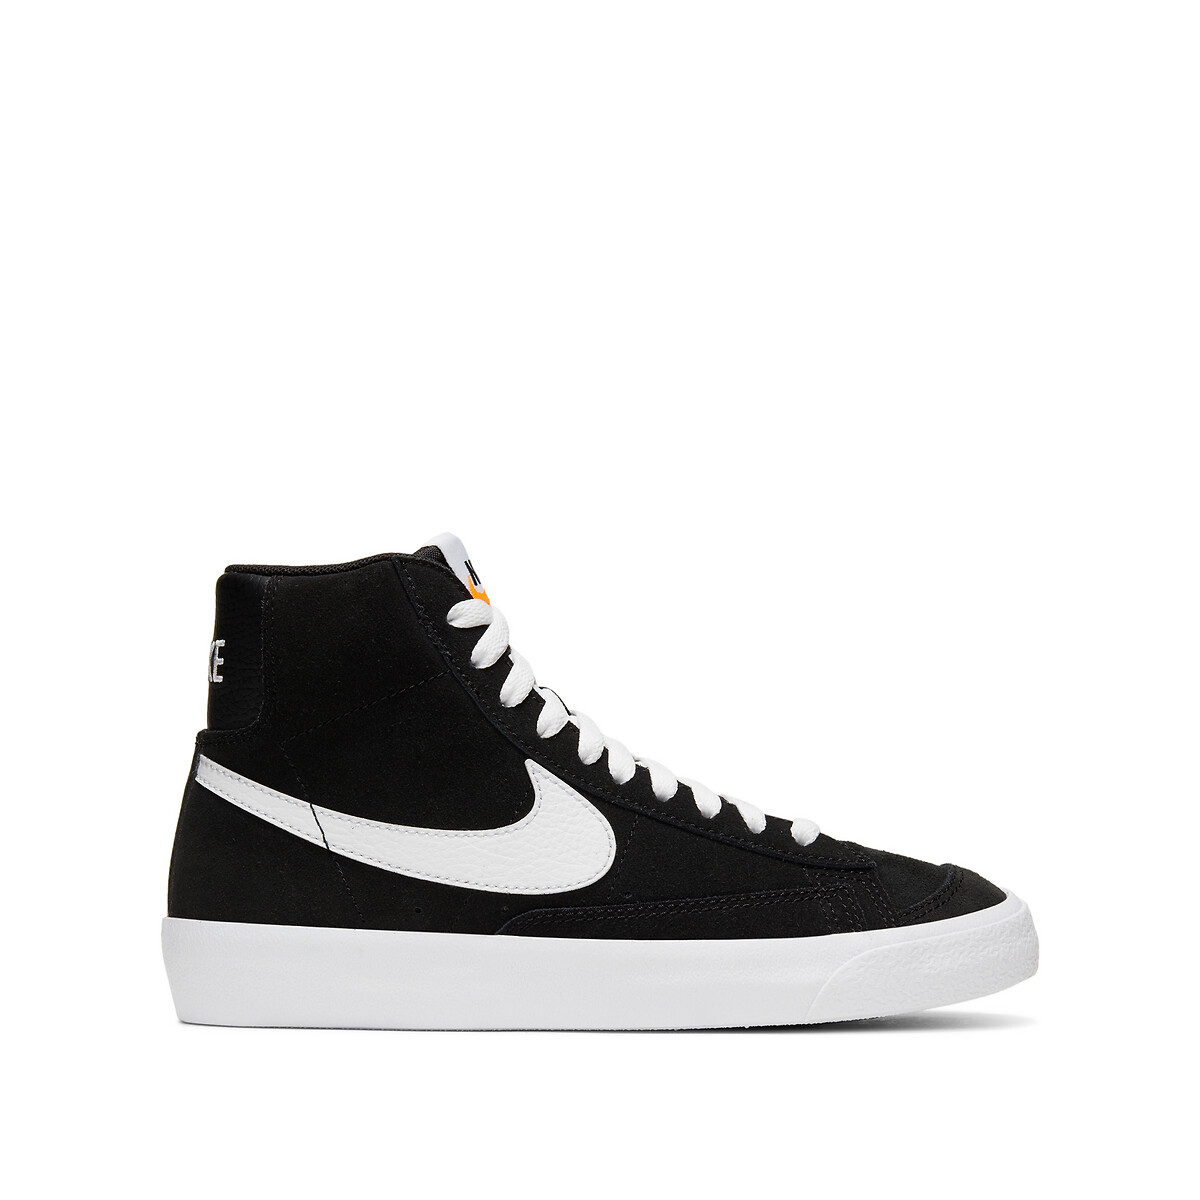 Chaussures Nike fille | La Redoute